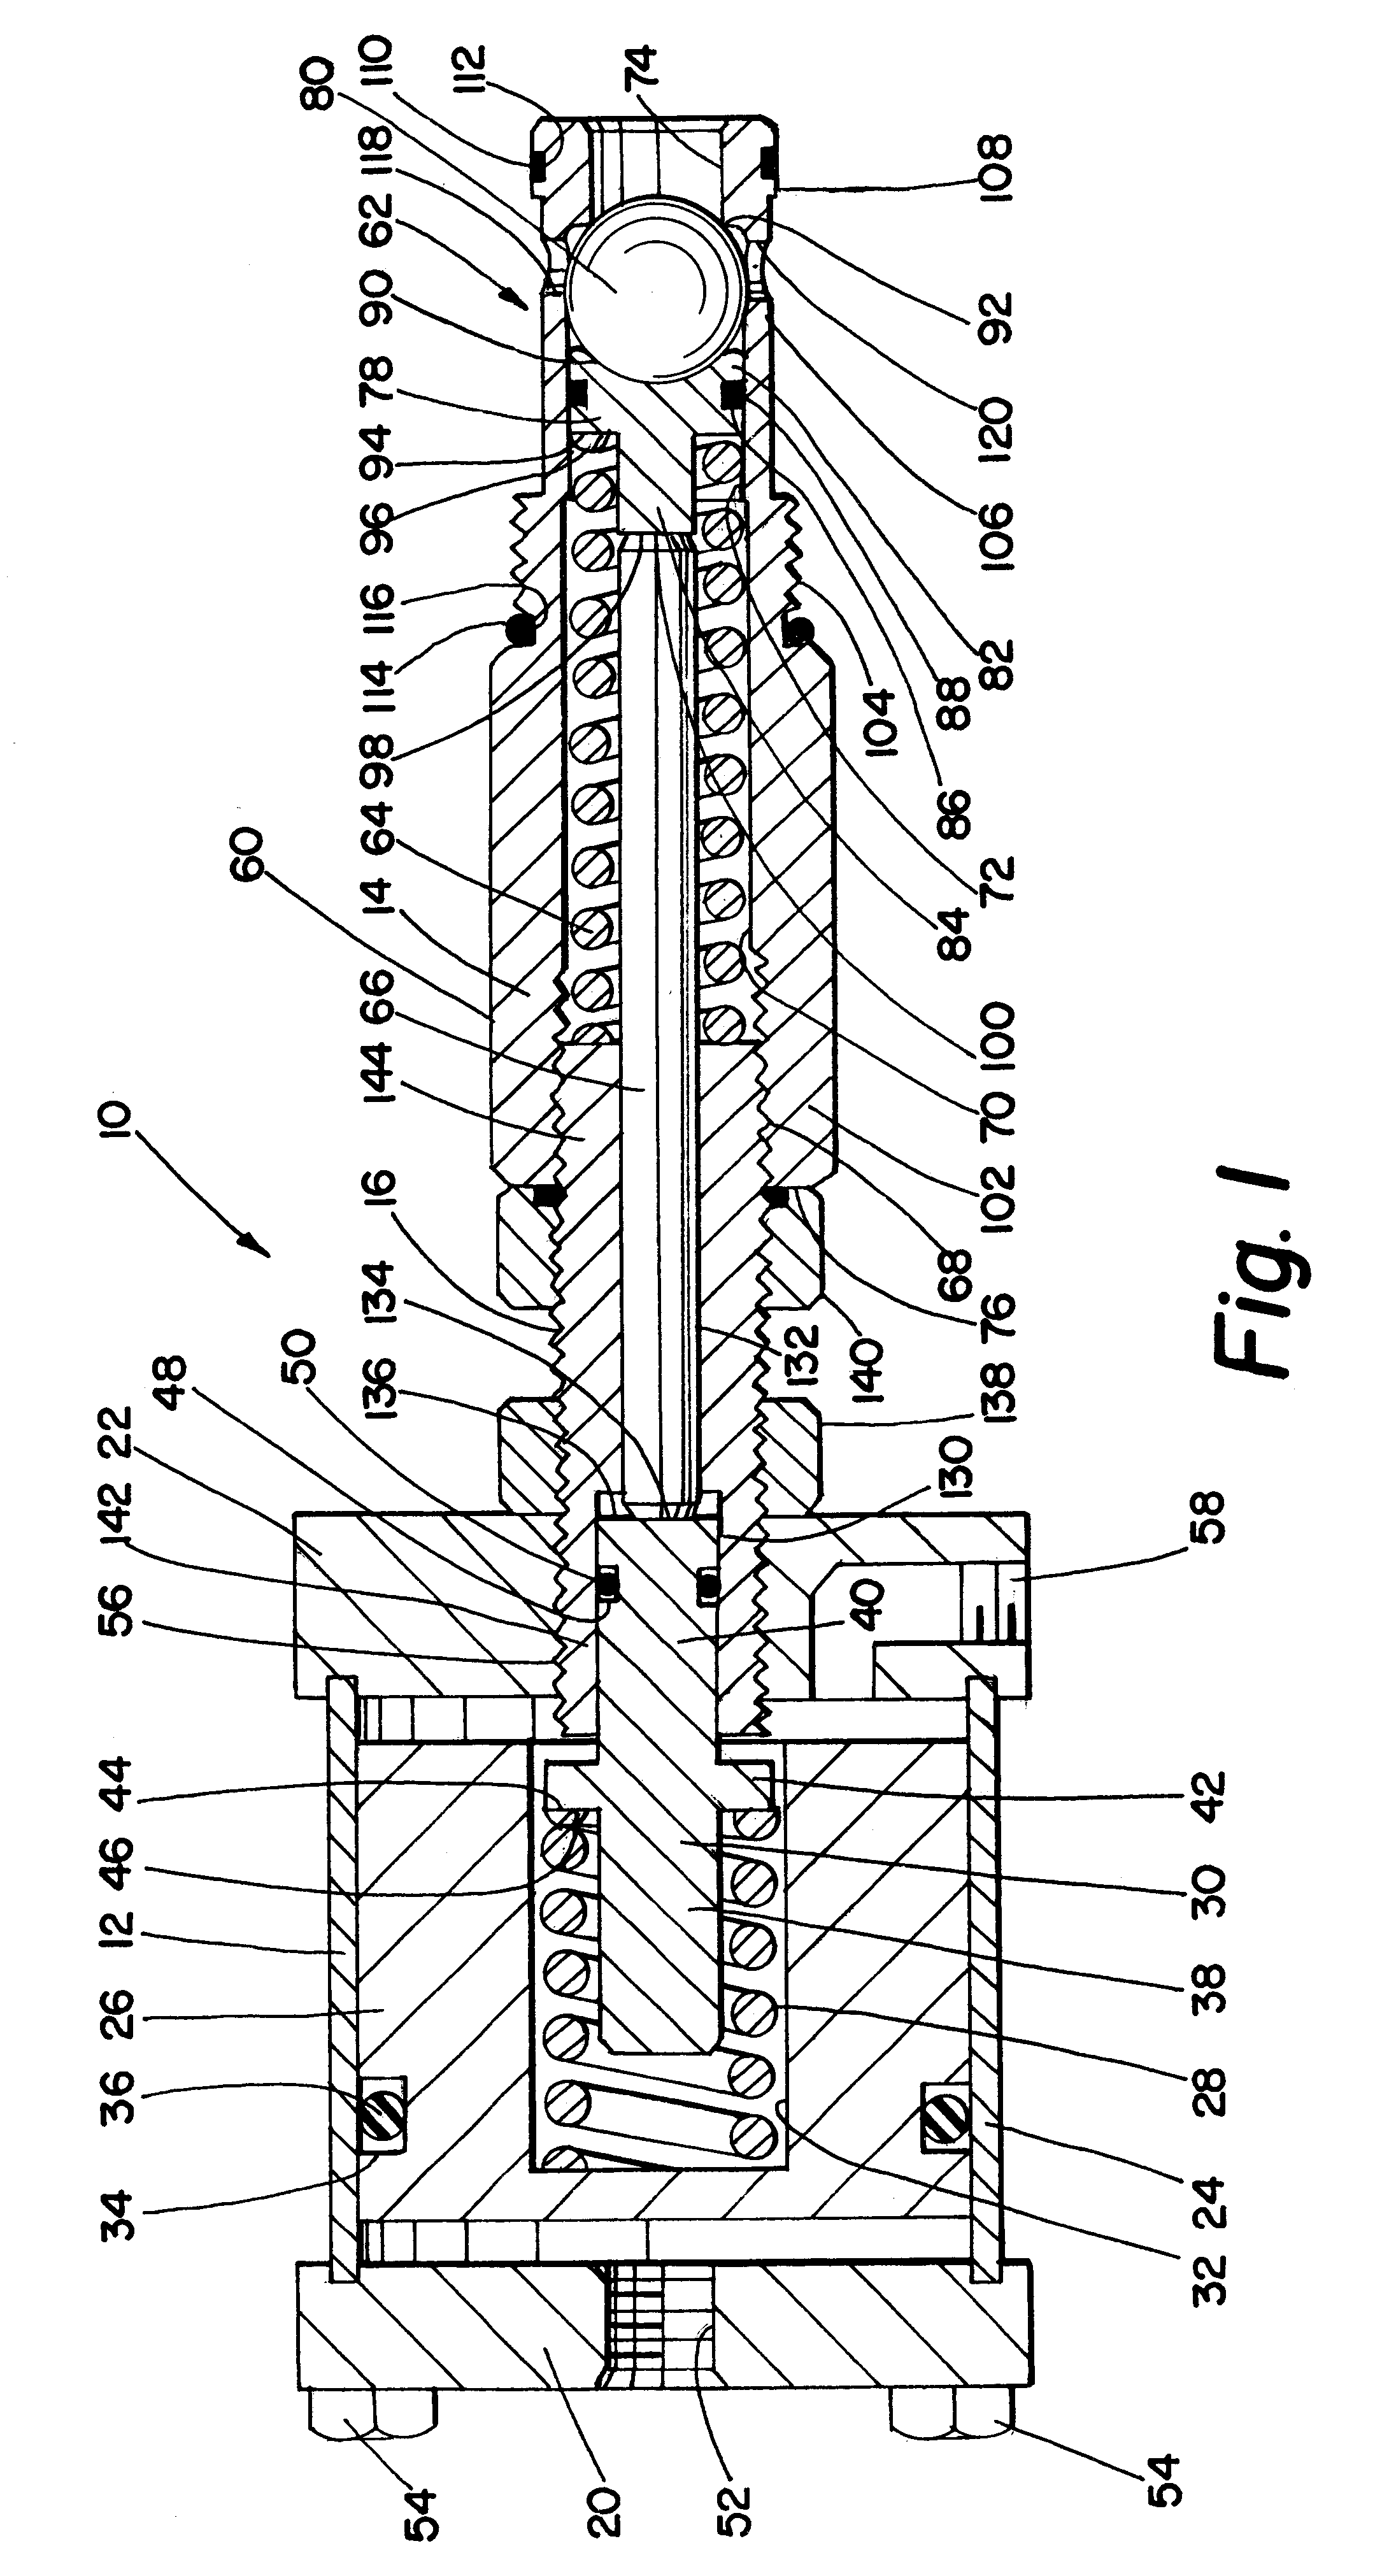 Remotely actuated multiple pressure direct acting relief valve